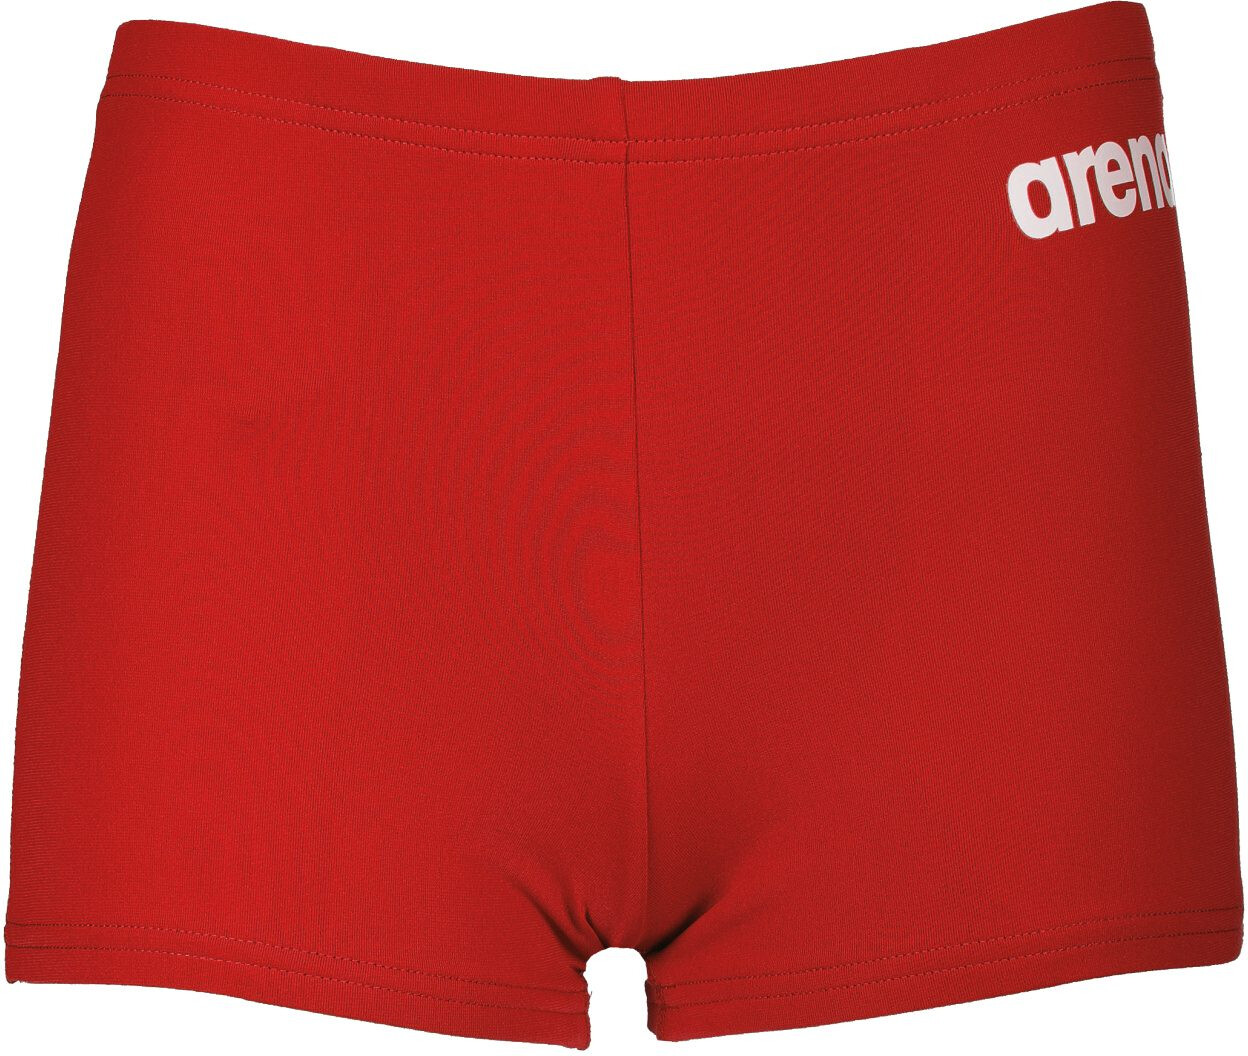 arenaTeam Solid Shorts Jungen rot